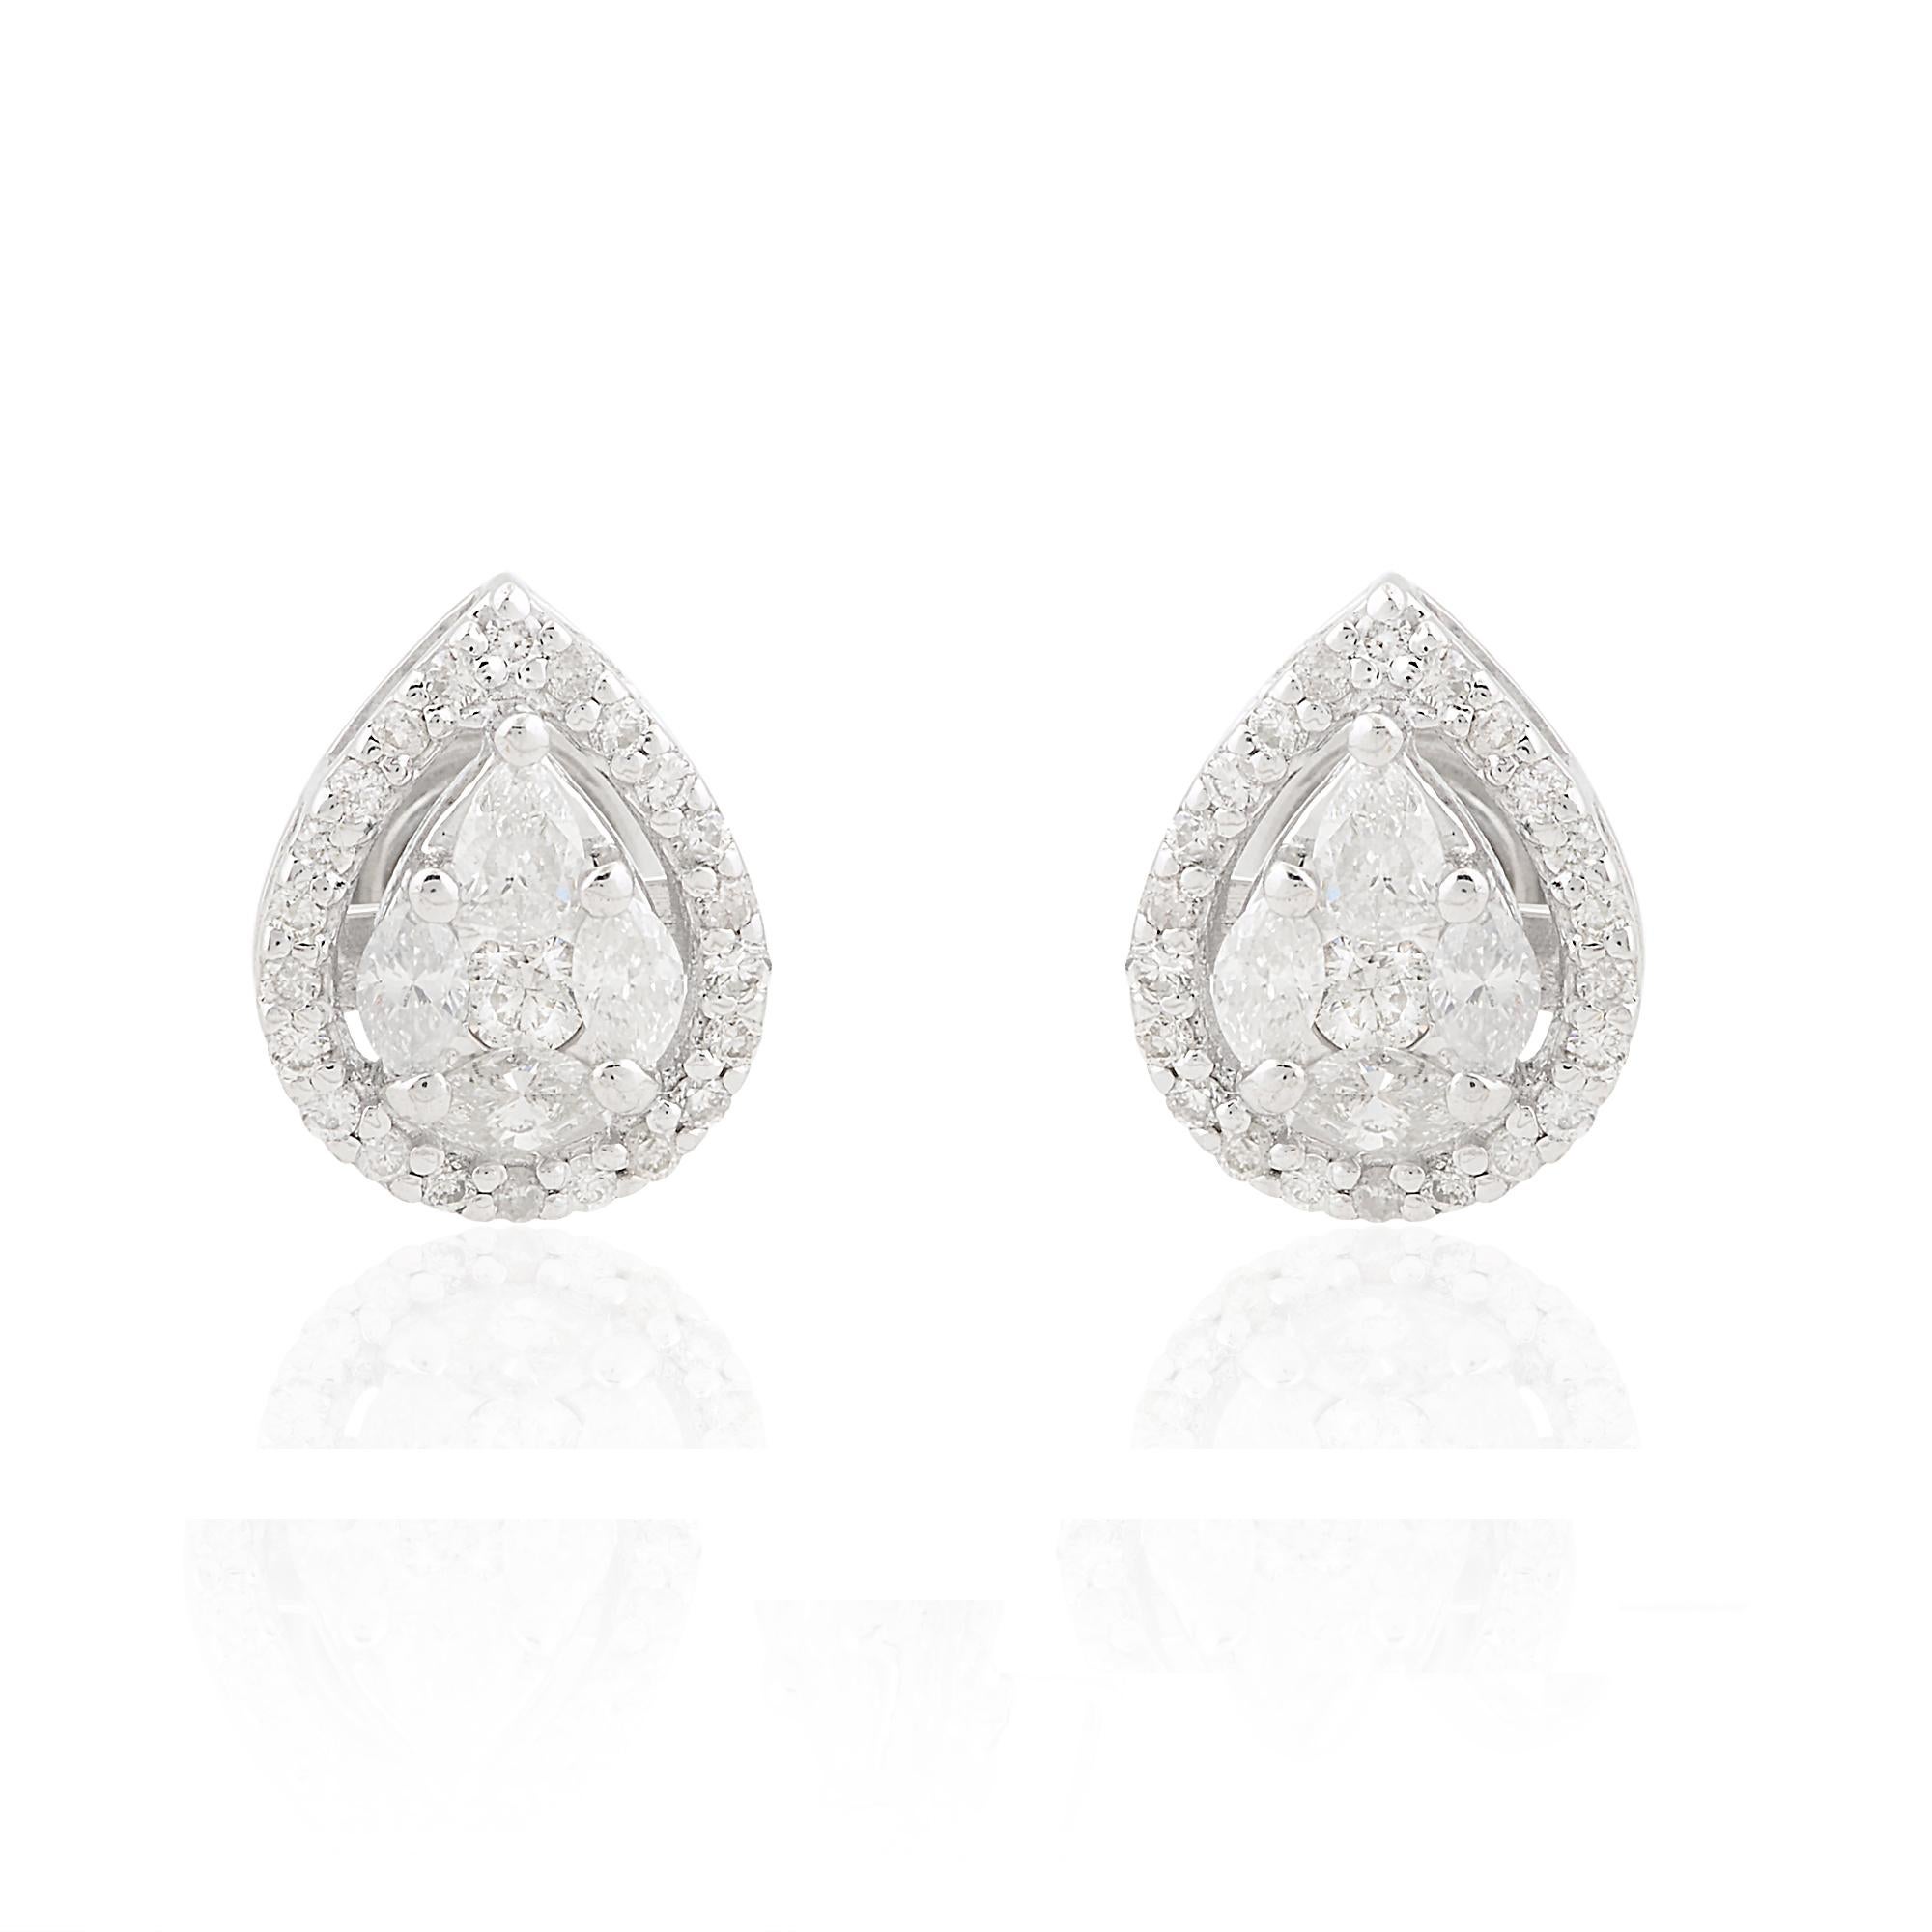 Indulge in the timeless elegance of these stunning pear-shaped diamond stud earrings, crafted with exquisite attention to detail and unparalleled finesse. Each earring features a magnificent pear or marquise-cut diamond, meticulously selected for